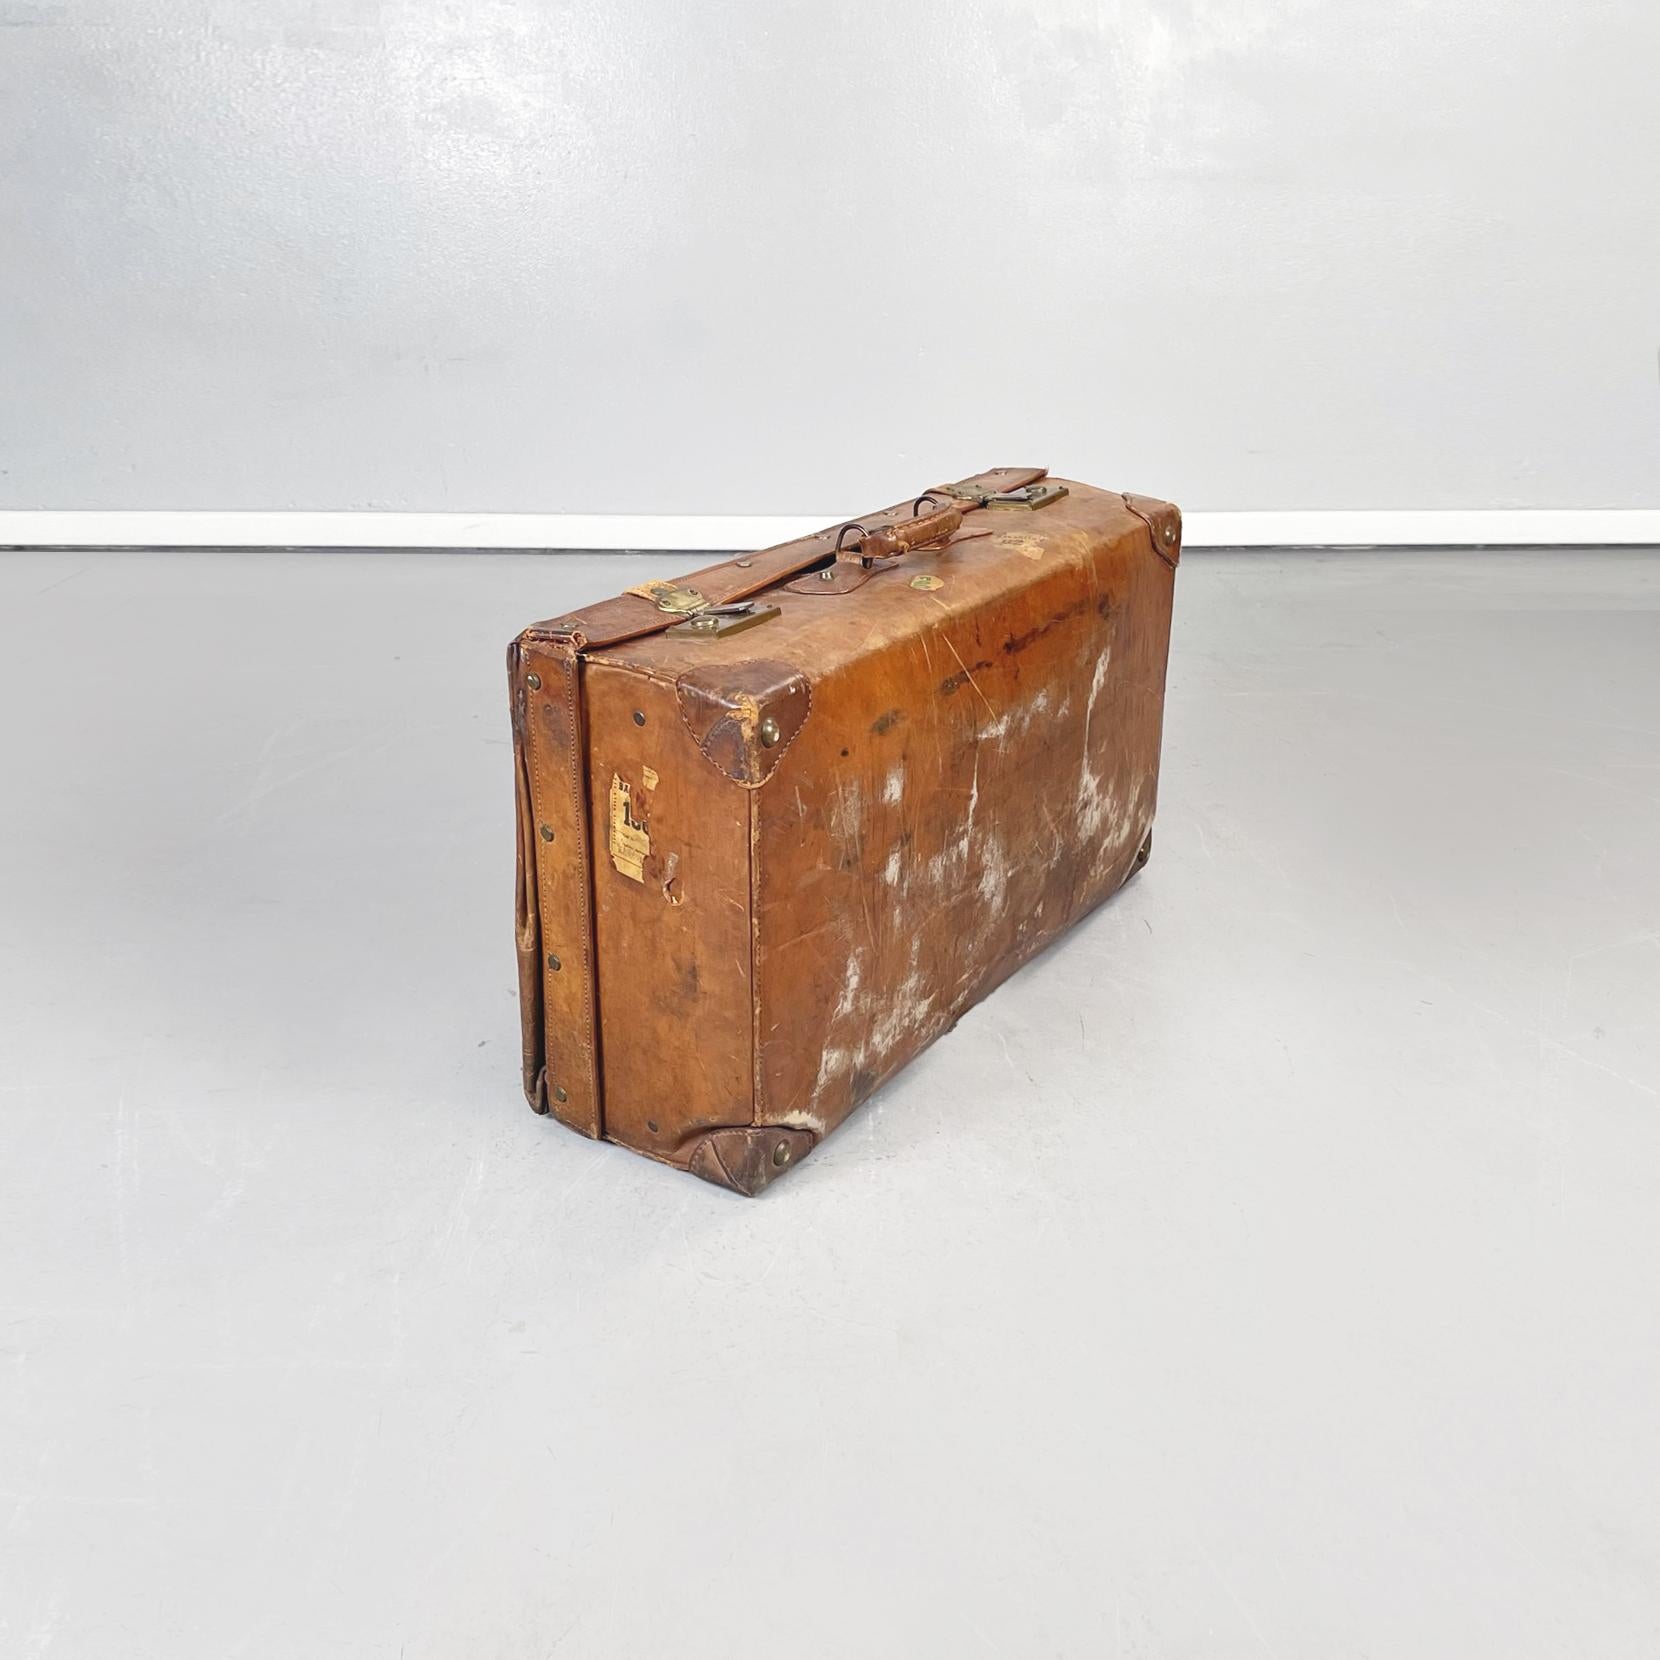 Italian Mid-Century Modern Luggage in brown leather with beige fabric, 1960s
Rectangular suitcase in light brown leather with stickers. Metal closure, handle present. Beige fabric interior with two compartments, one of which with envelope and thin